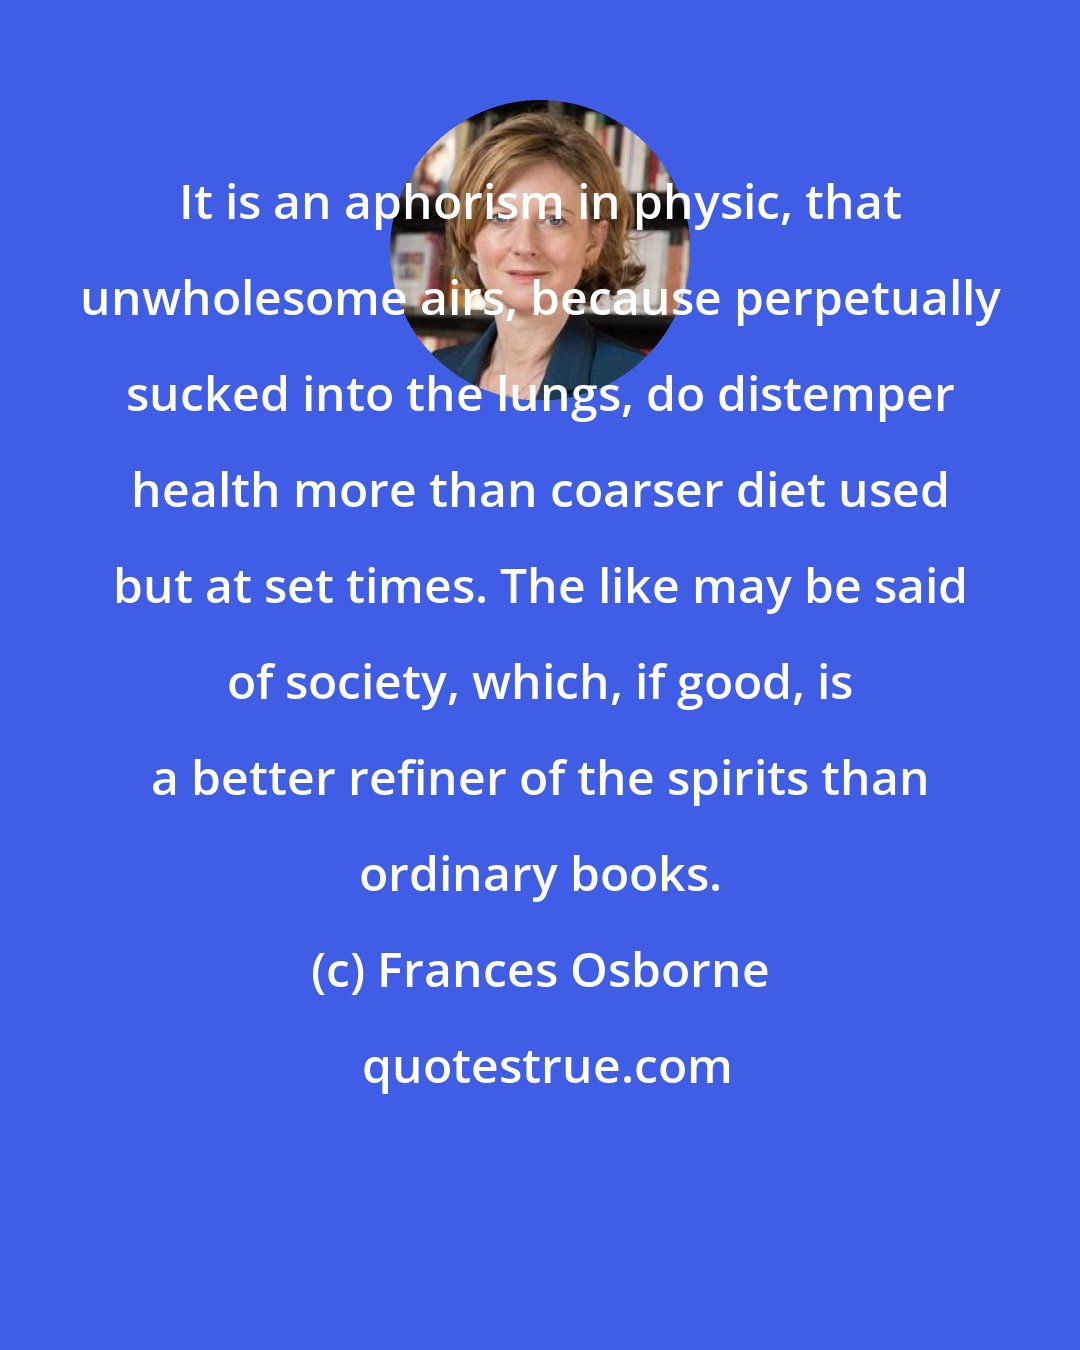 Frances Osborne: It is an aphorism in physic, that unwholesome airs, because perpetually sucked into the lungs, do distemper health more than coarser diet used but at set times. The like may be said of society, which, if good, is a better refiner of the spirits than ordinary books.